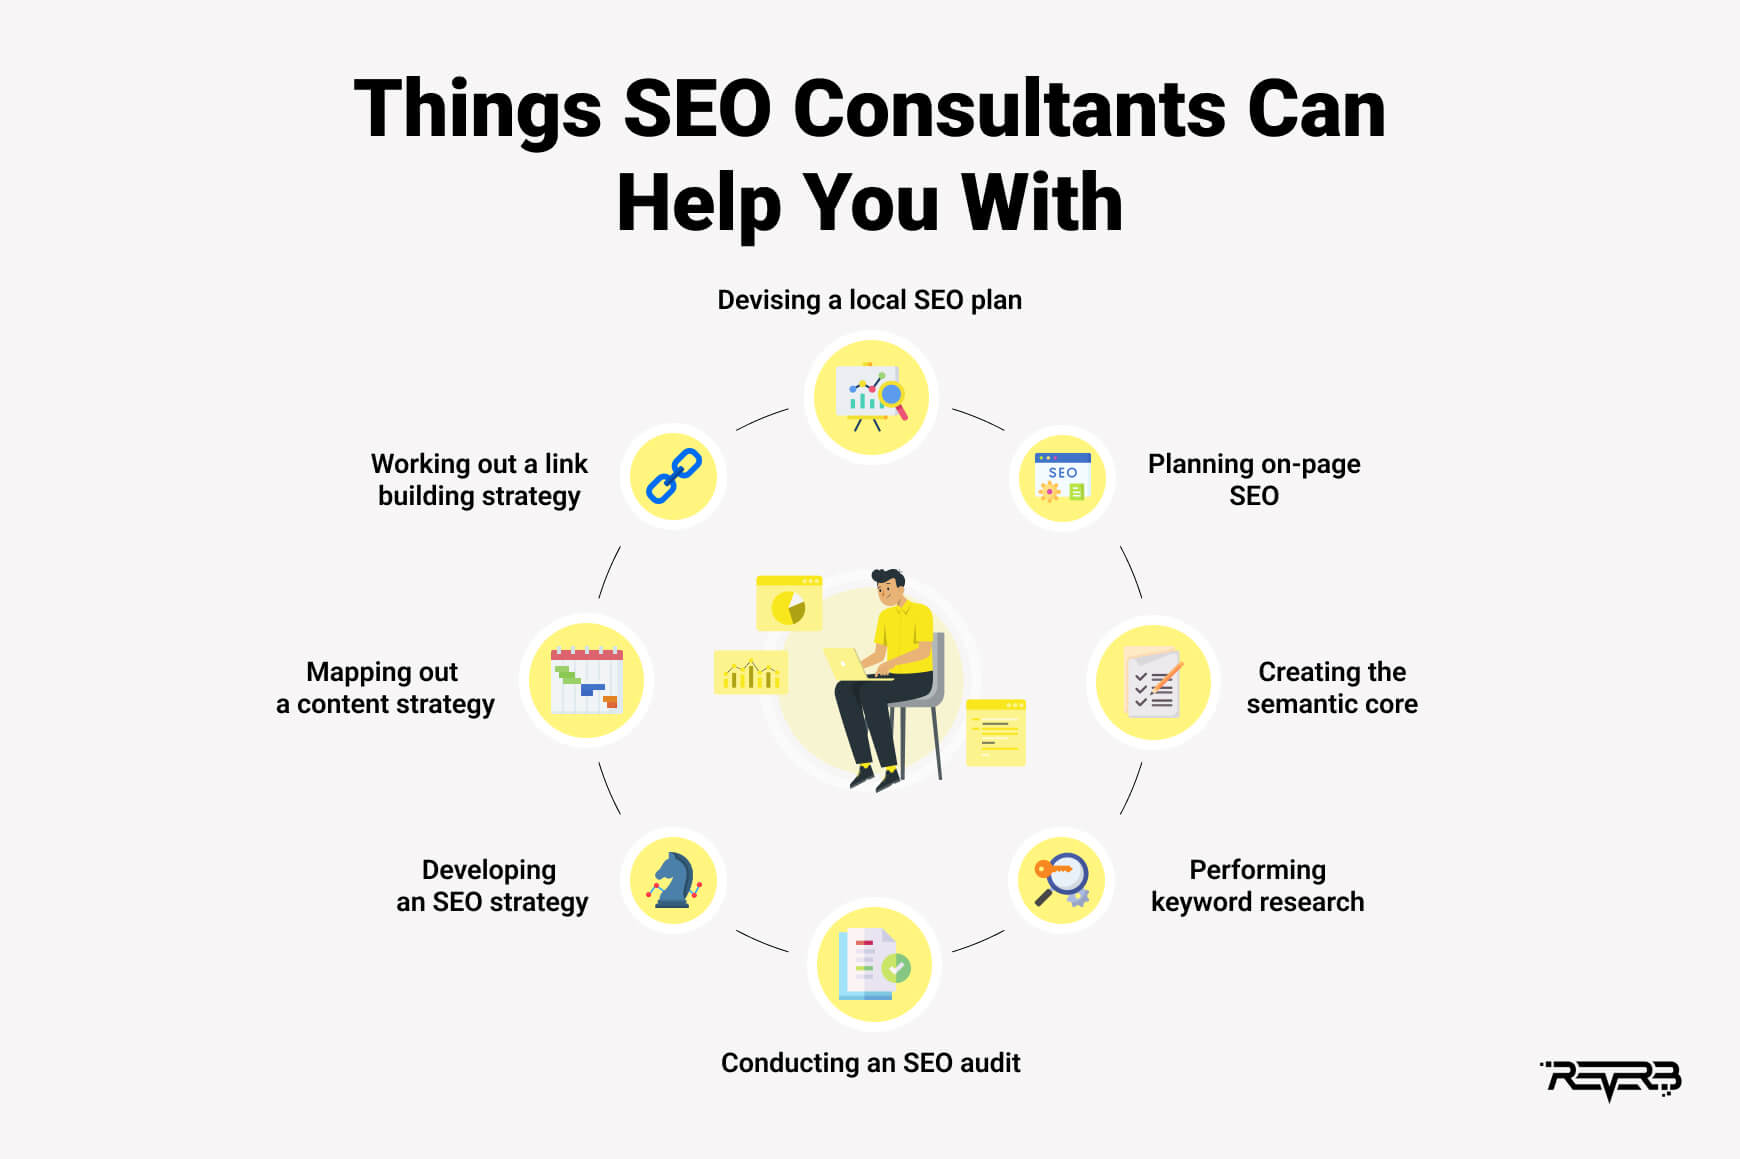 Things SEO Consultants Can Help You With